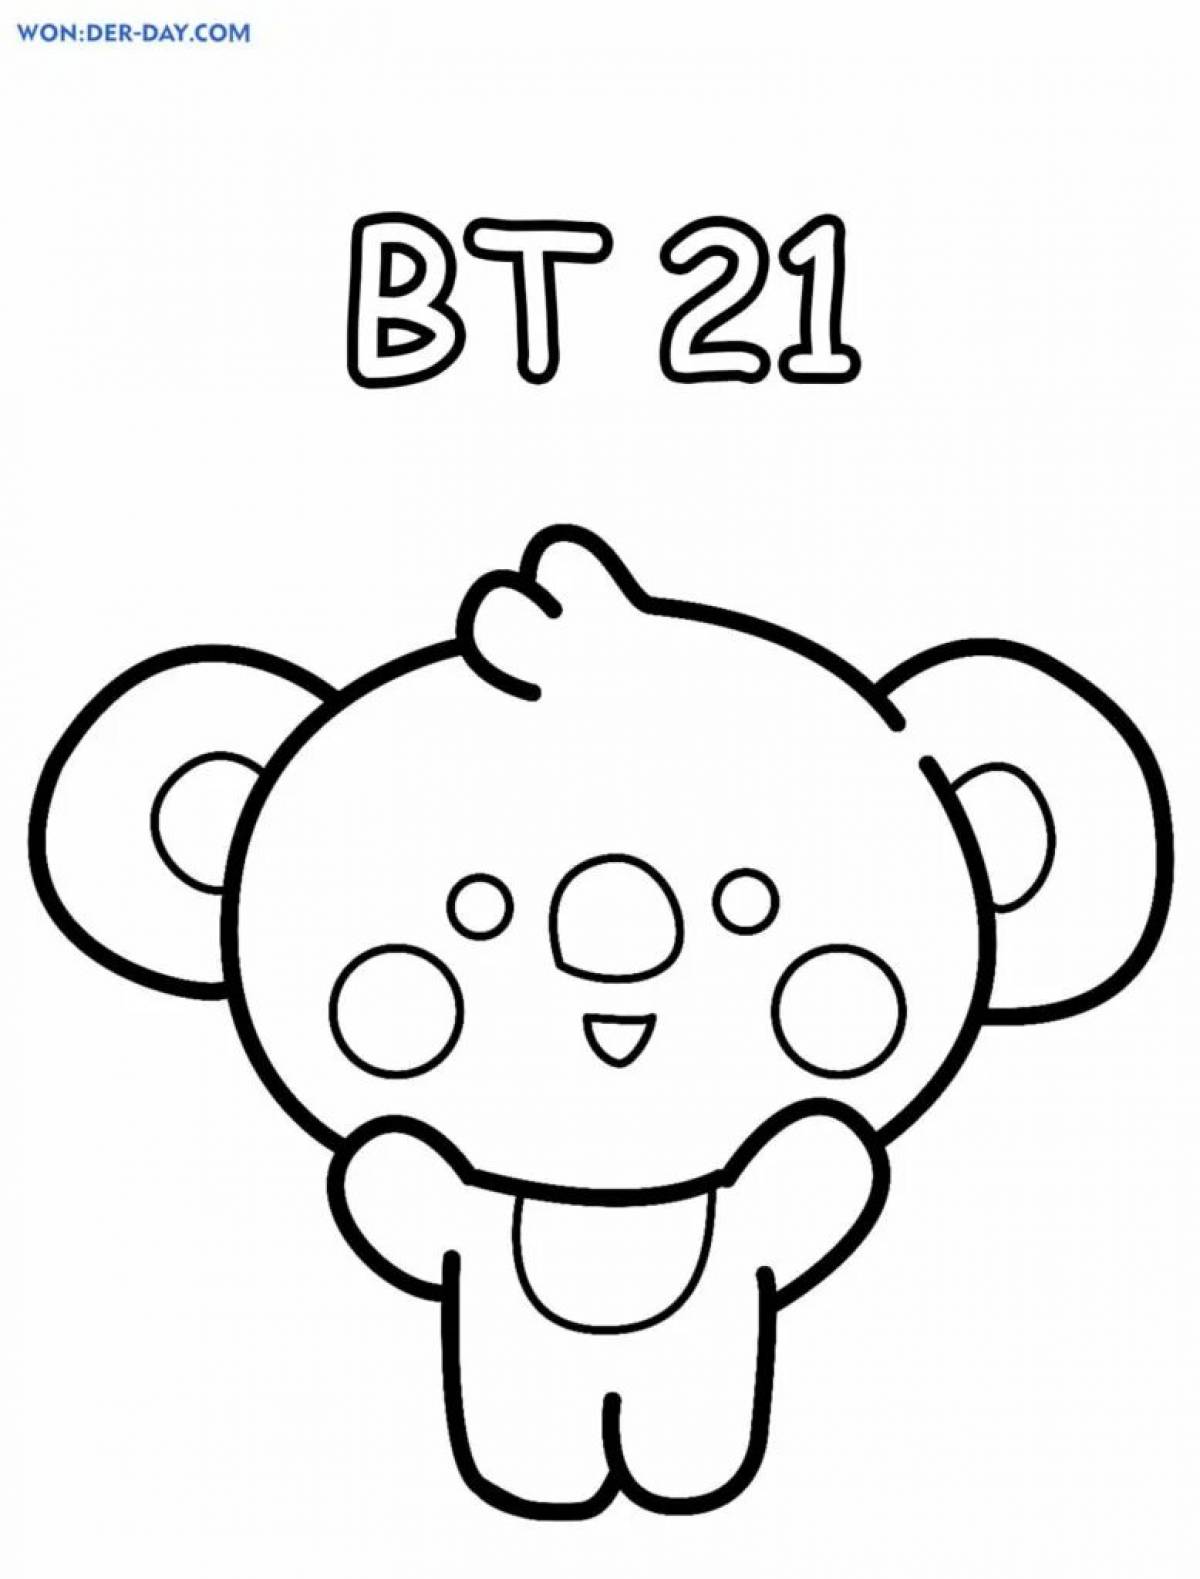 Coloring page amazement cookie bt21